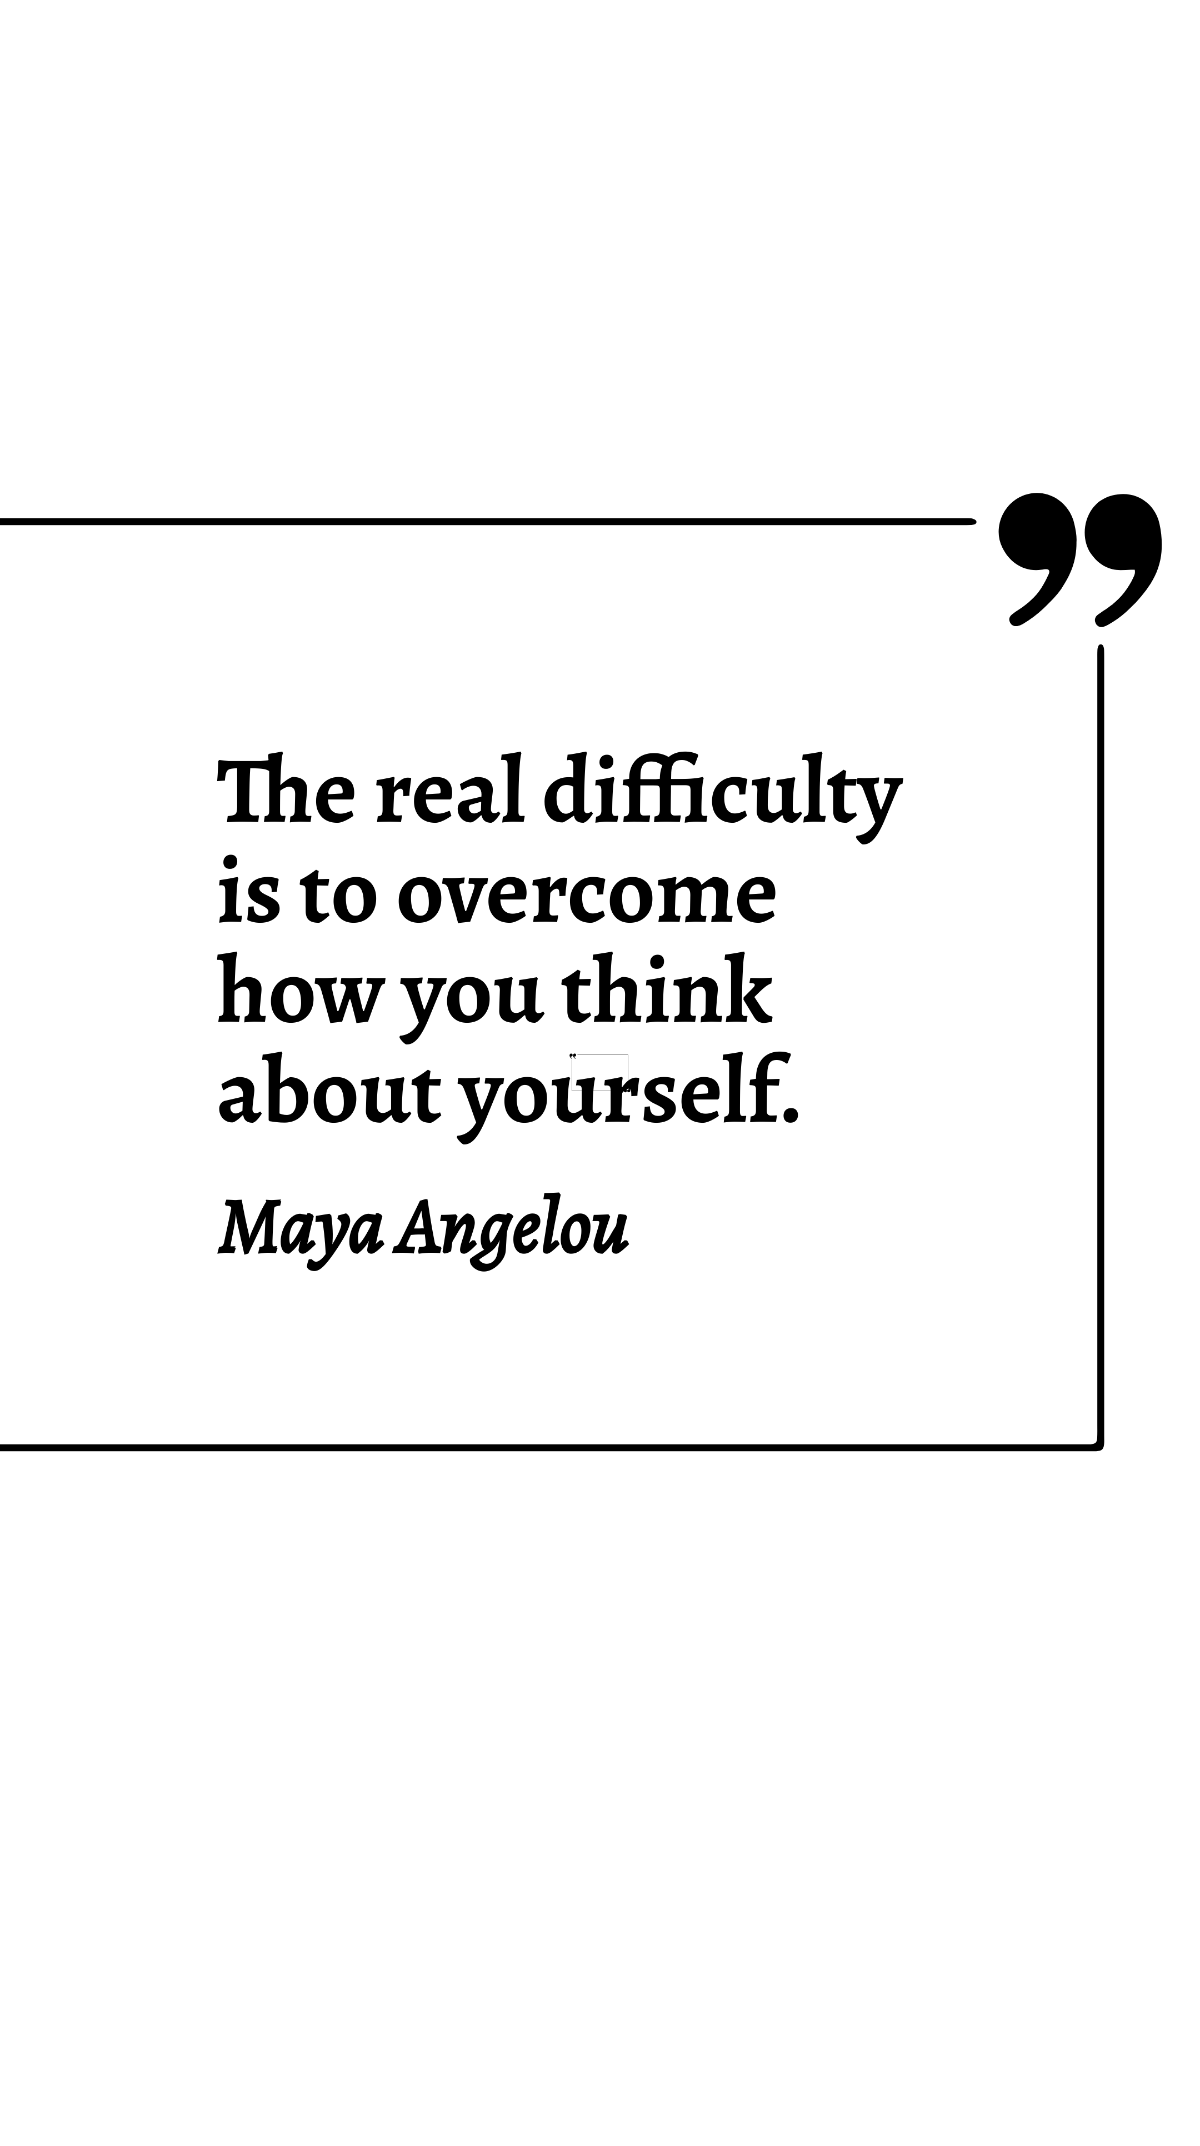 Free Maya Angelou - The real difficulty is to overcome how you think about yourself. Template